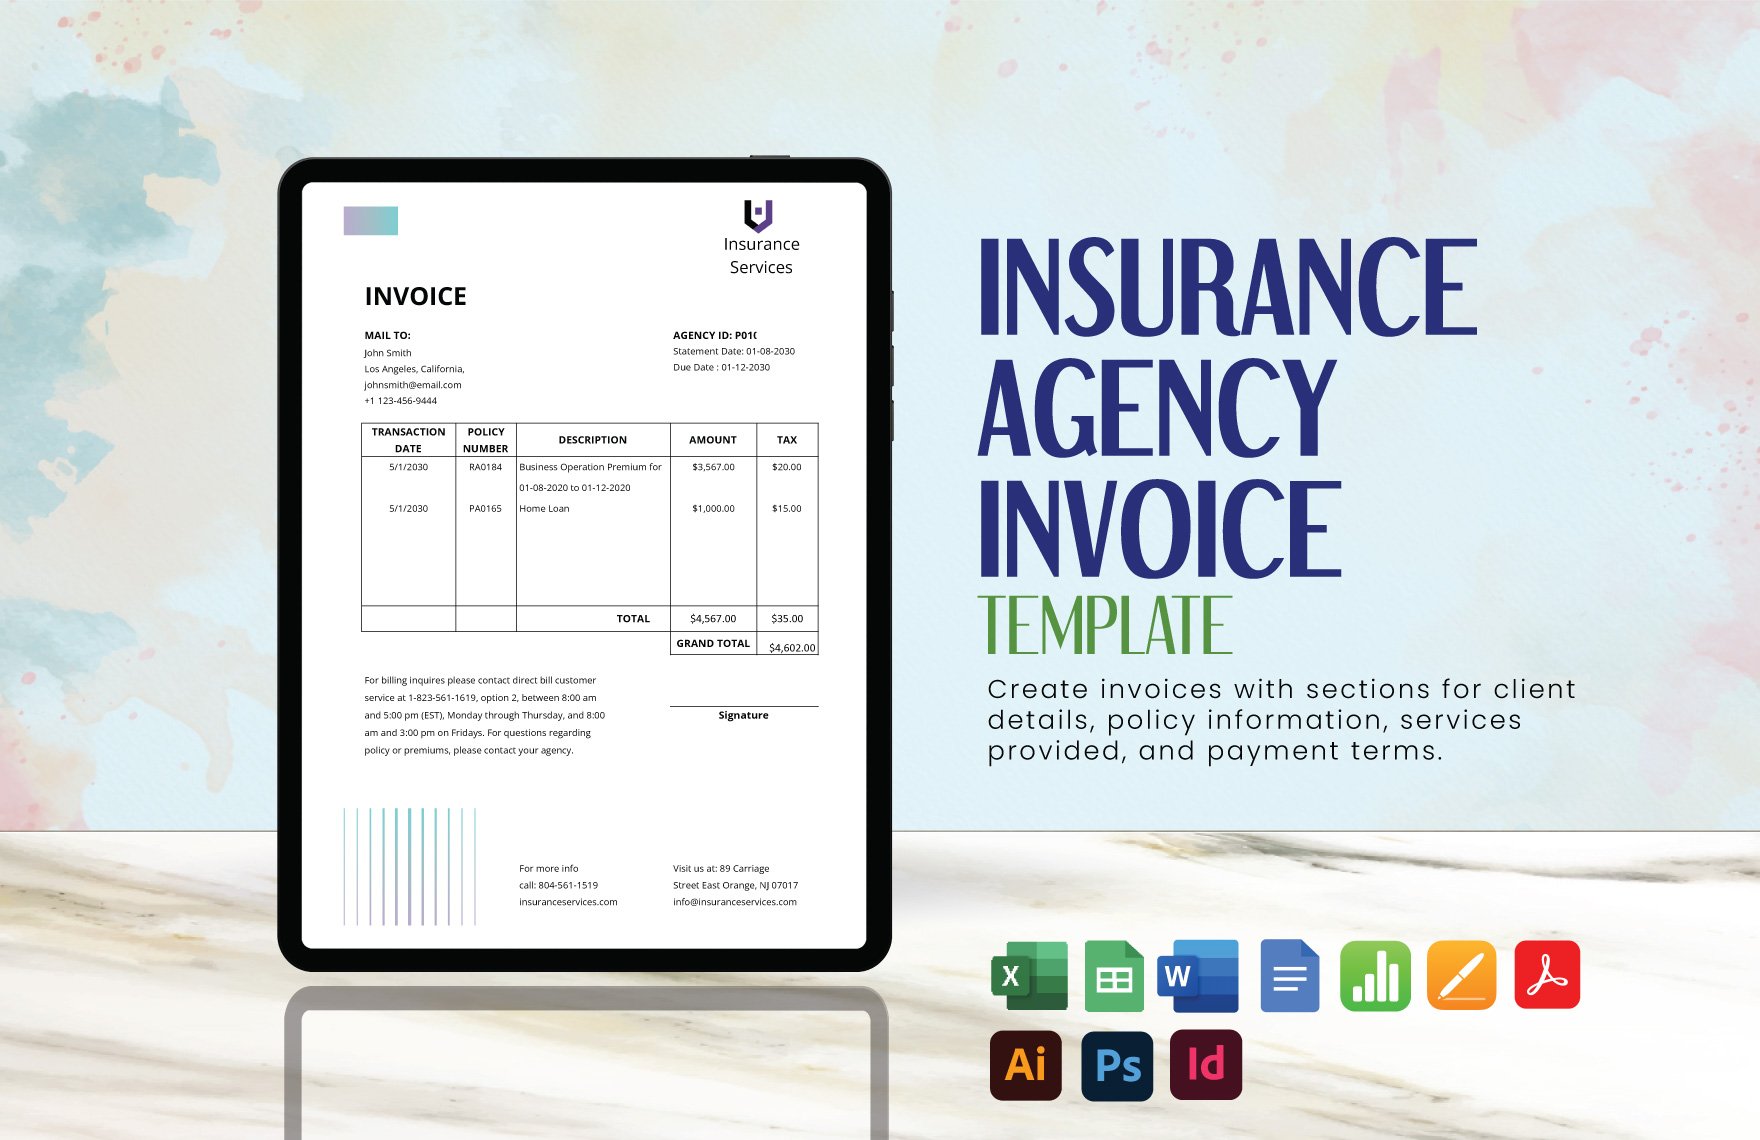 Insurance Agency Invoice Template in Word, Google Docs, Excel, PDF, Google Sheets, Illustrator, PSD, Apple Pages, InDesign, Apple Numbers